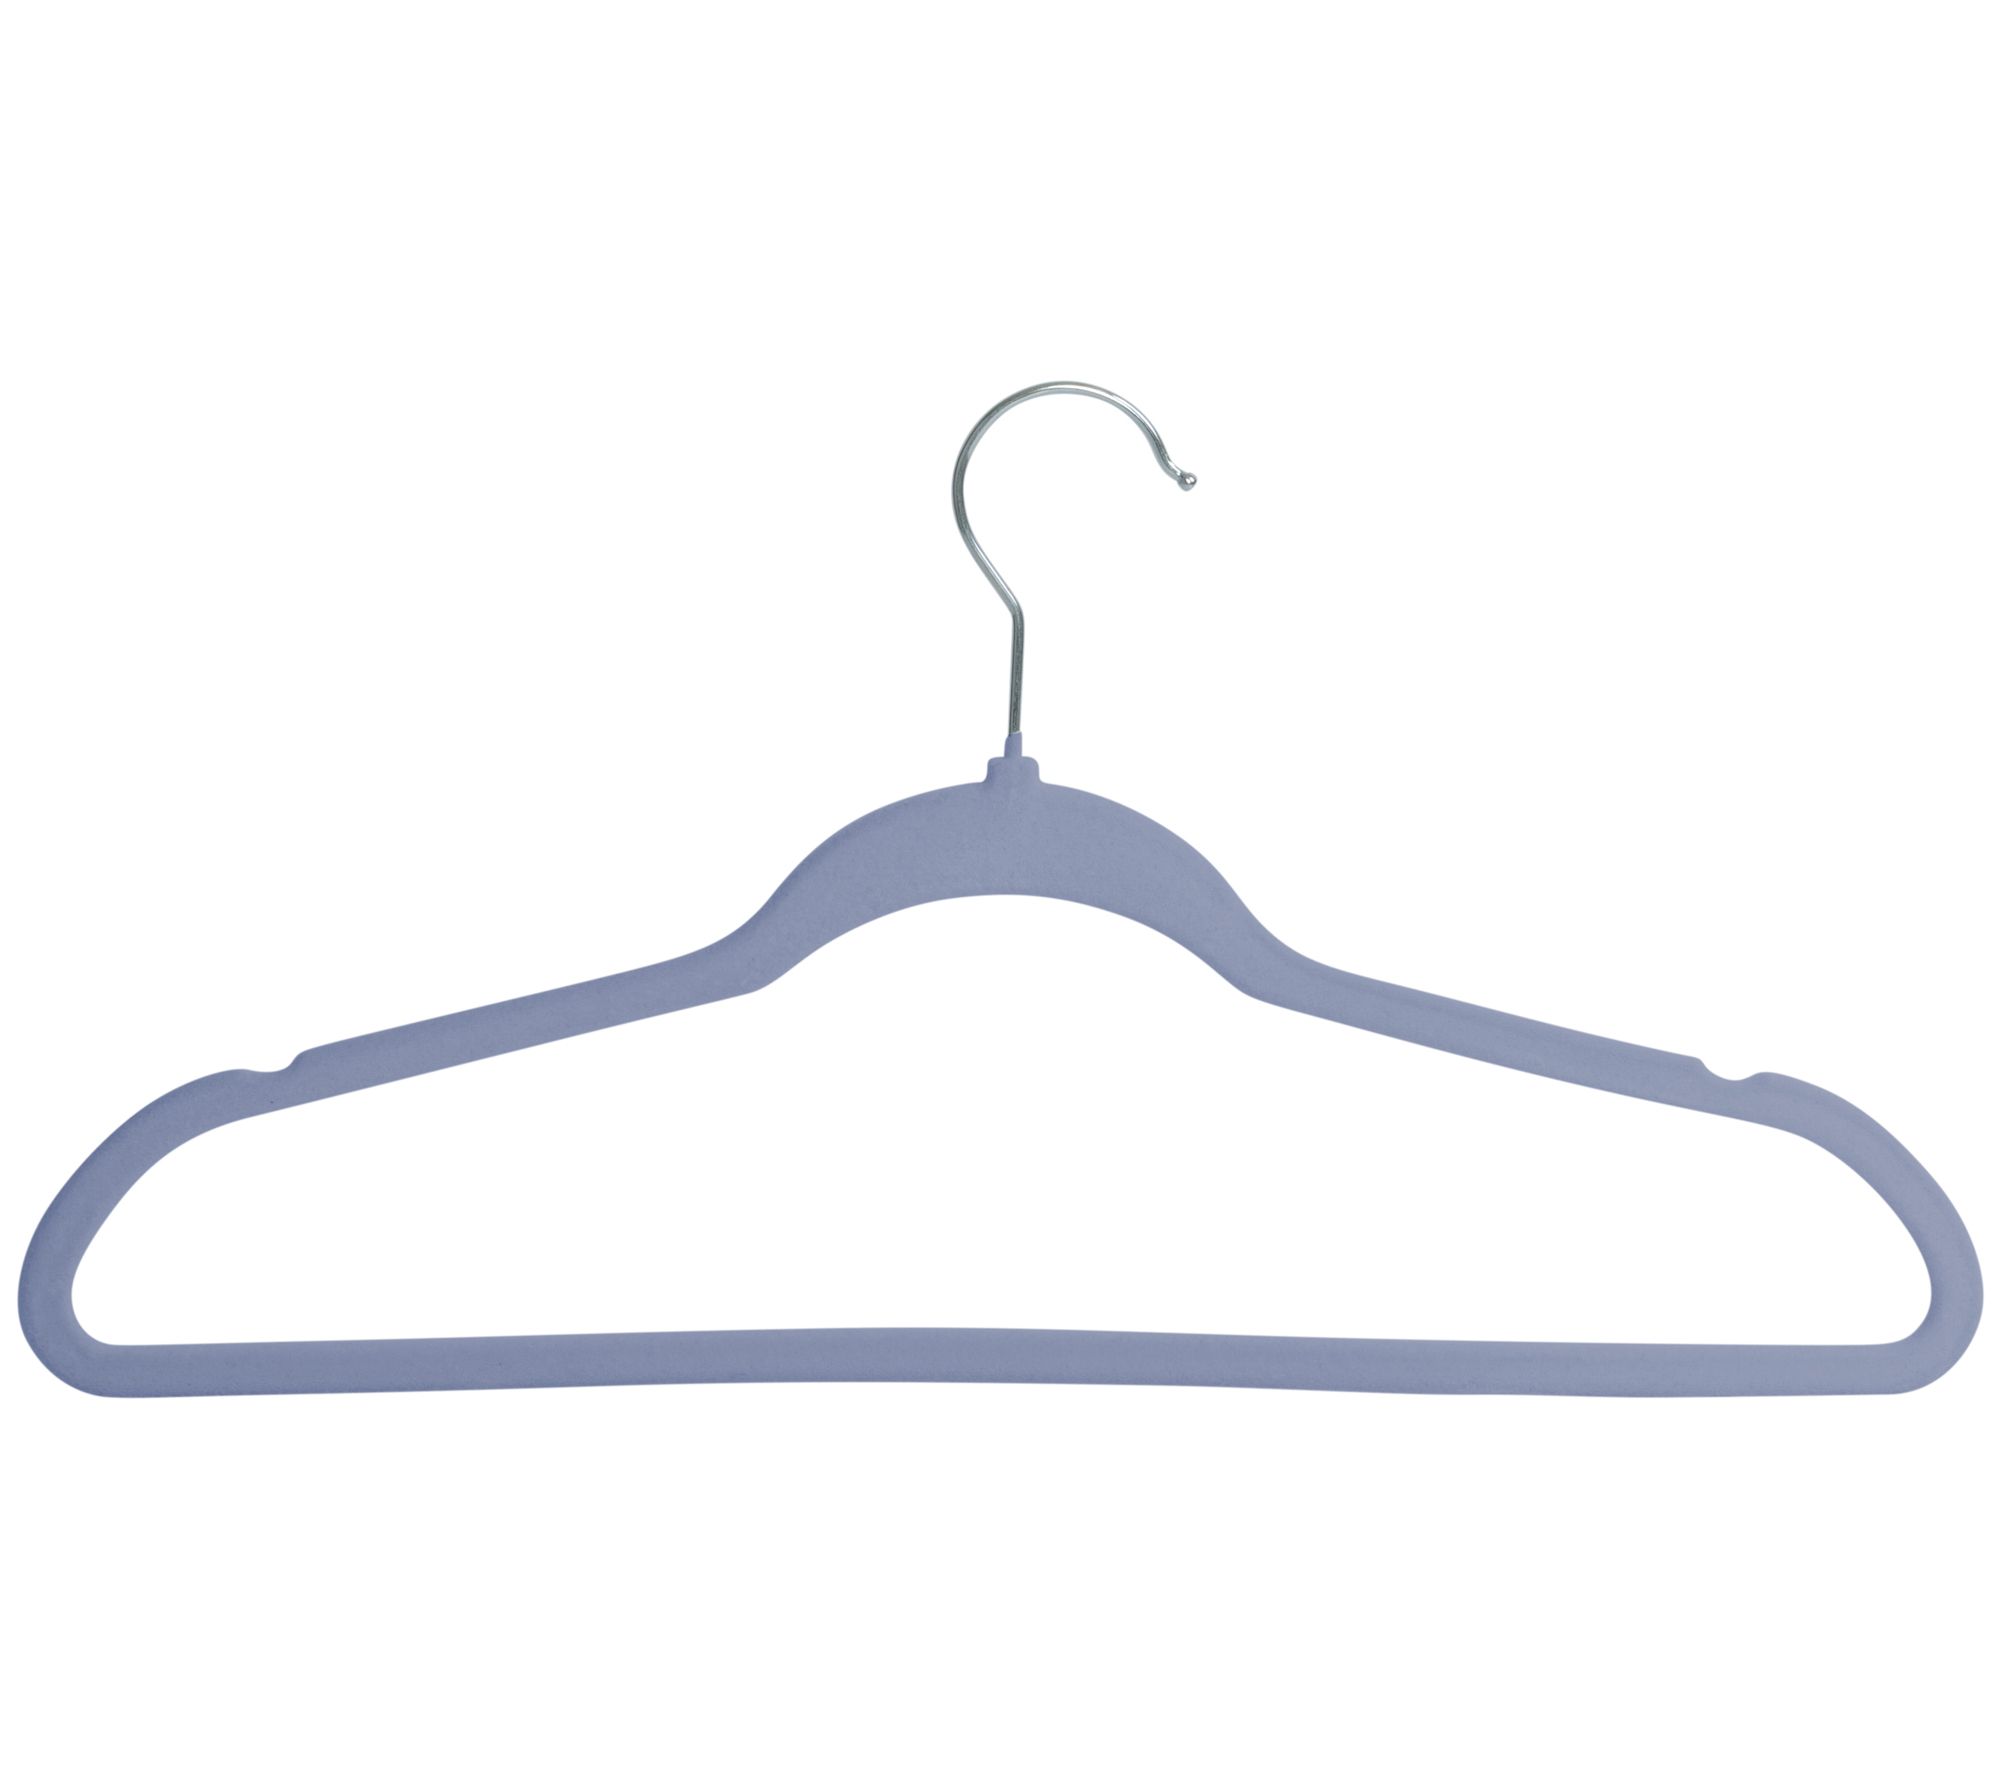 White Recycled Plastic Hangers with Hooks (60-Pack)